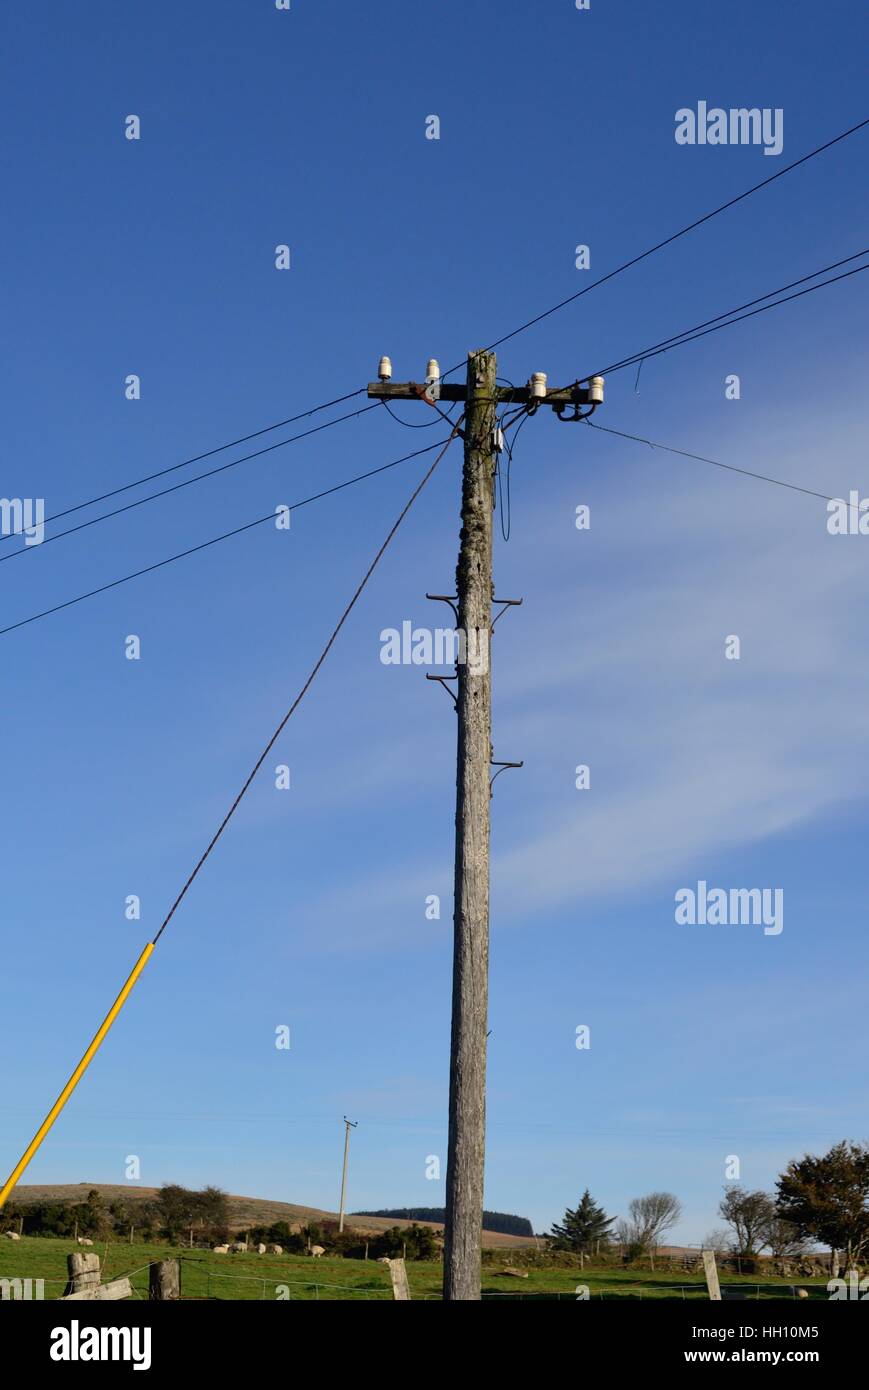 An old-fashioned telegraph pole with ceramic insulators Stock Photo - Alamy